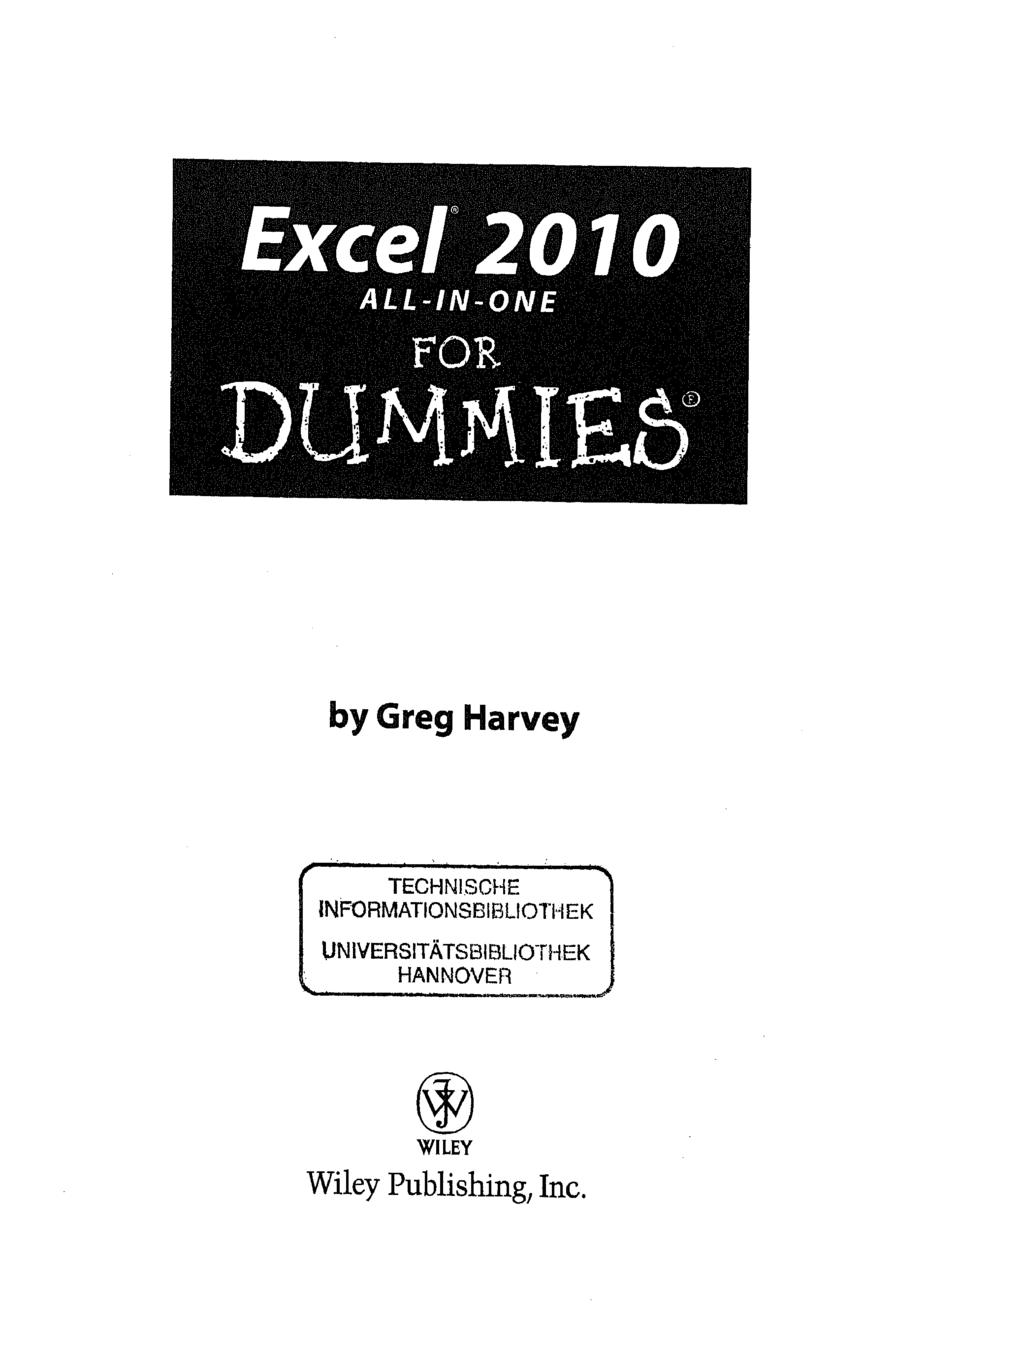 Excel 2010 ALL-IN-ONE FOR DUMHIE5* by Greg Harvey TECHN1SCHE